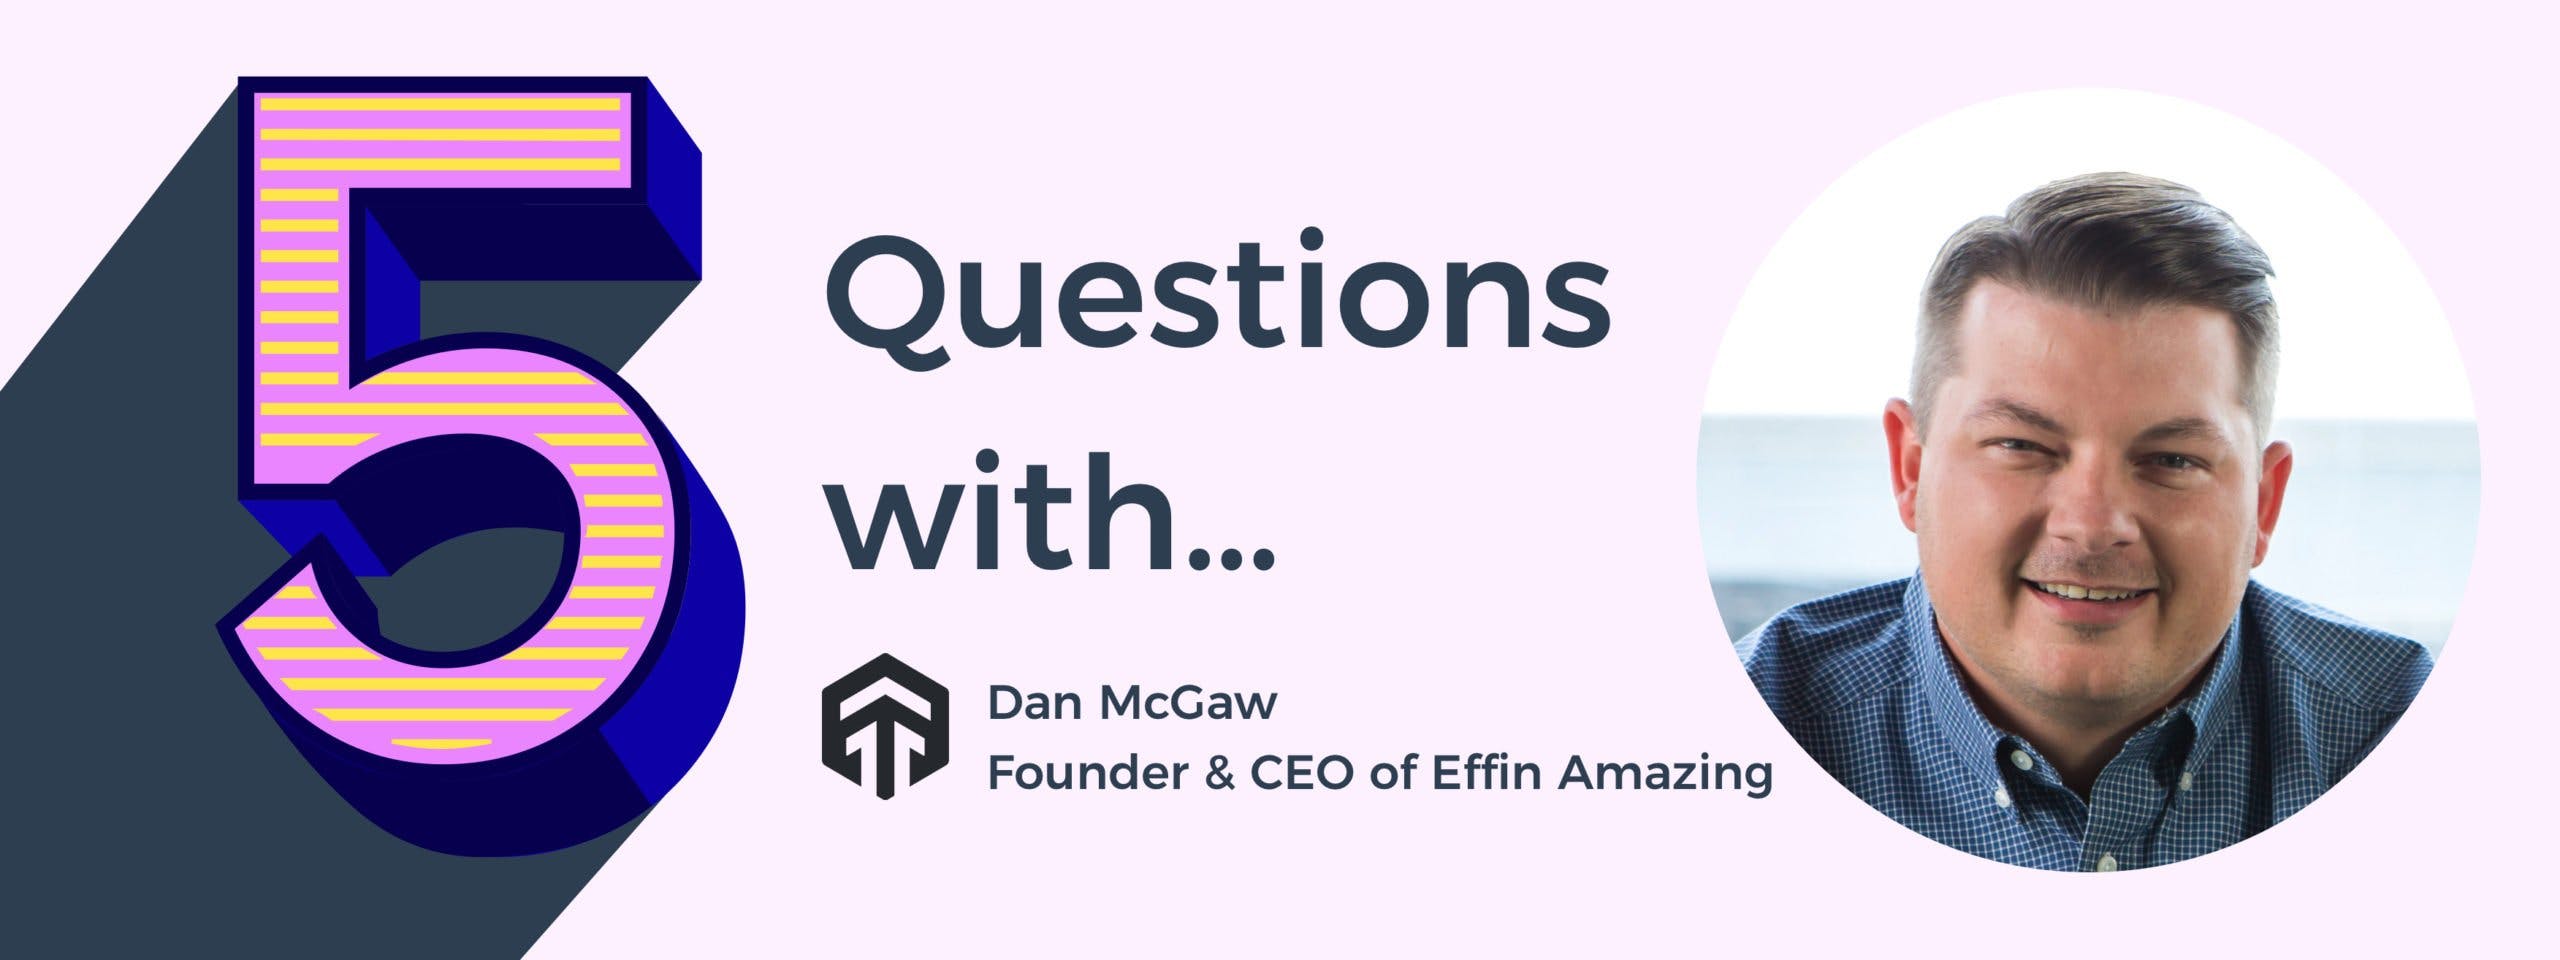 5 Questions with Dan McGaw, CEO at Effin Amazing